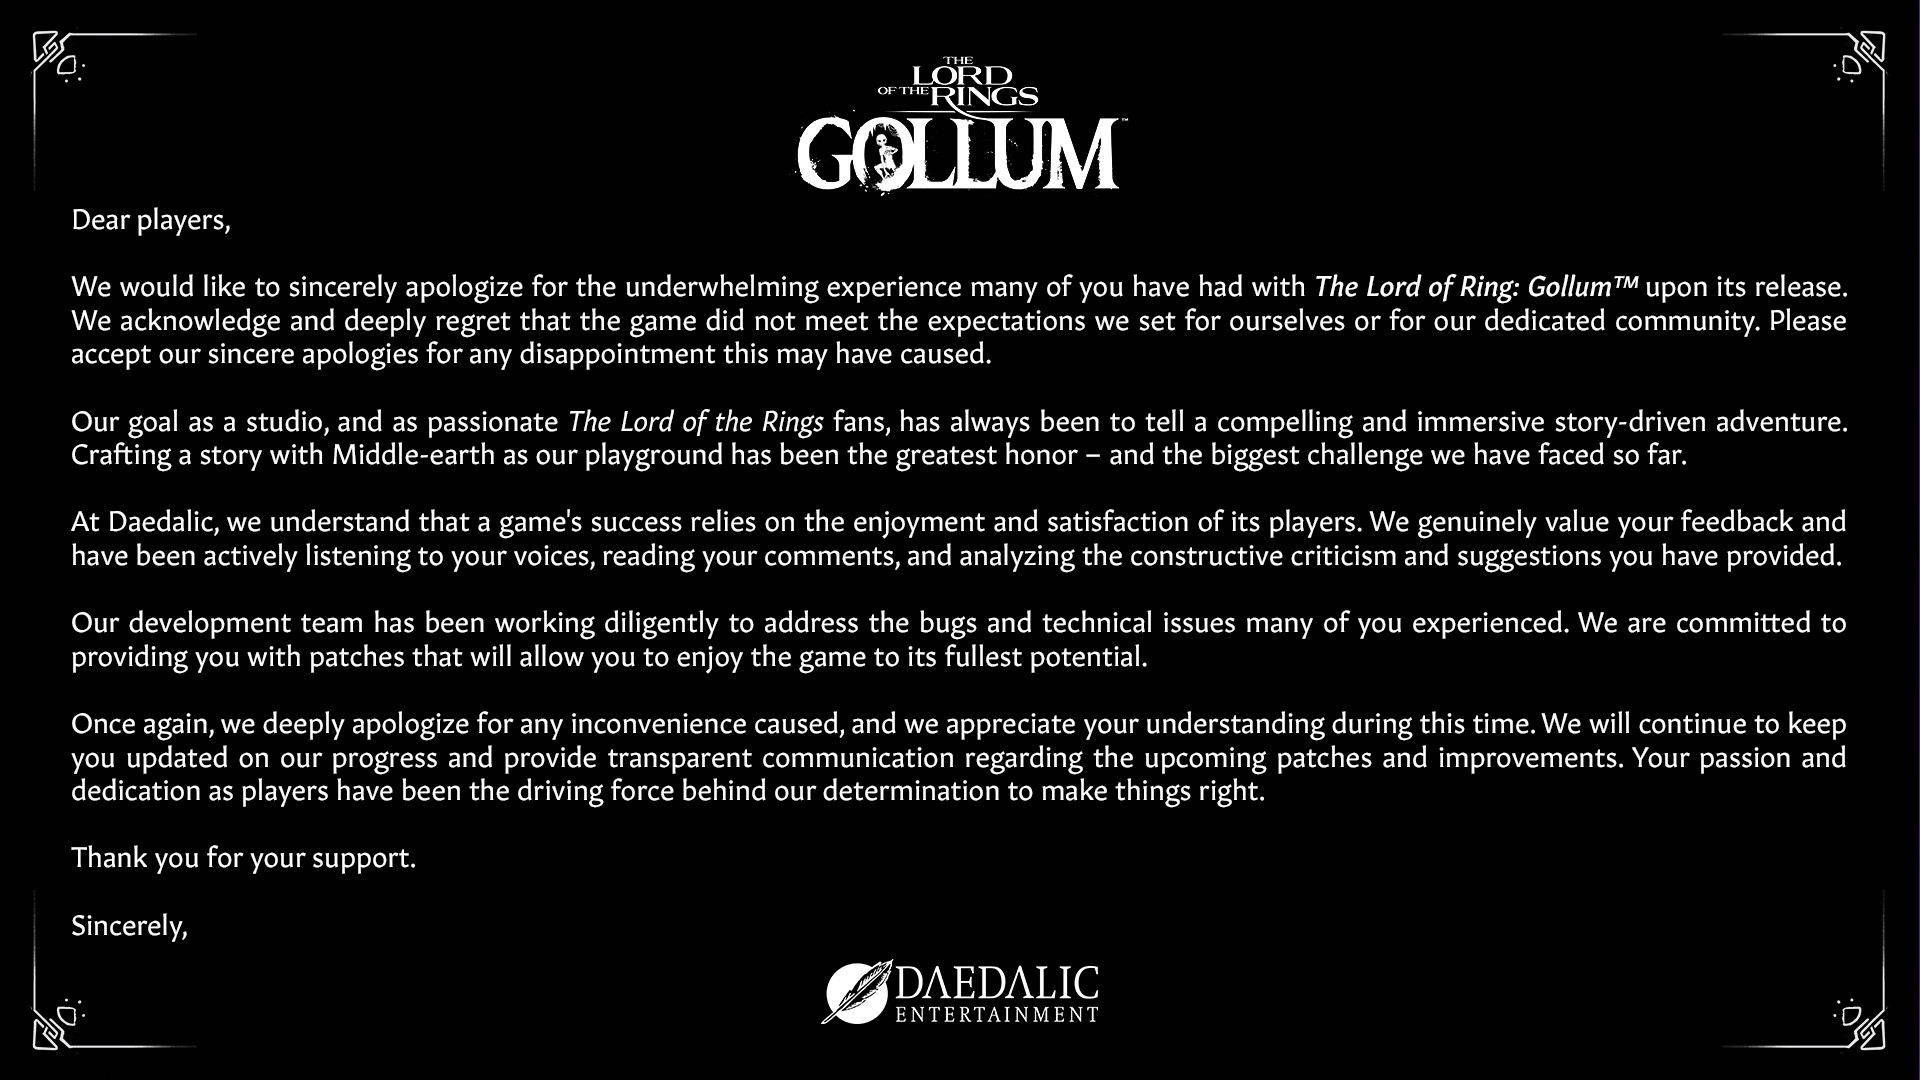 Gollum's failure prompts Daedalic to pull out of game development -  Merlin'in Kazani